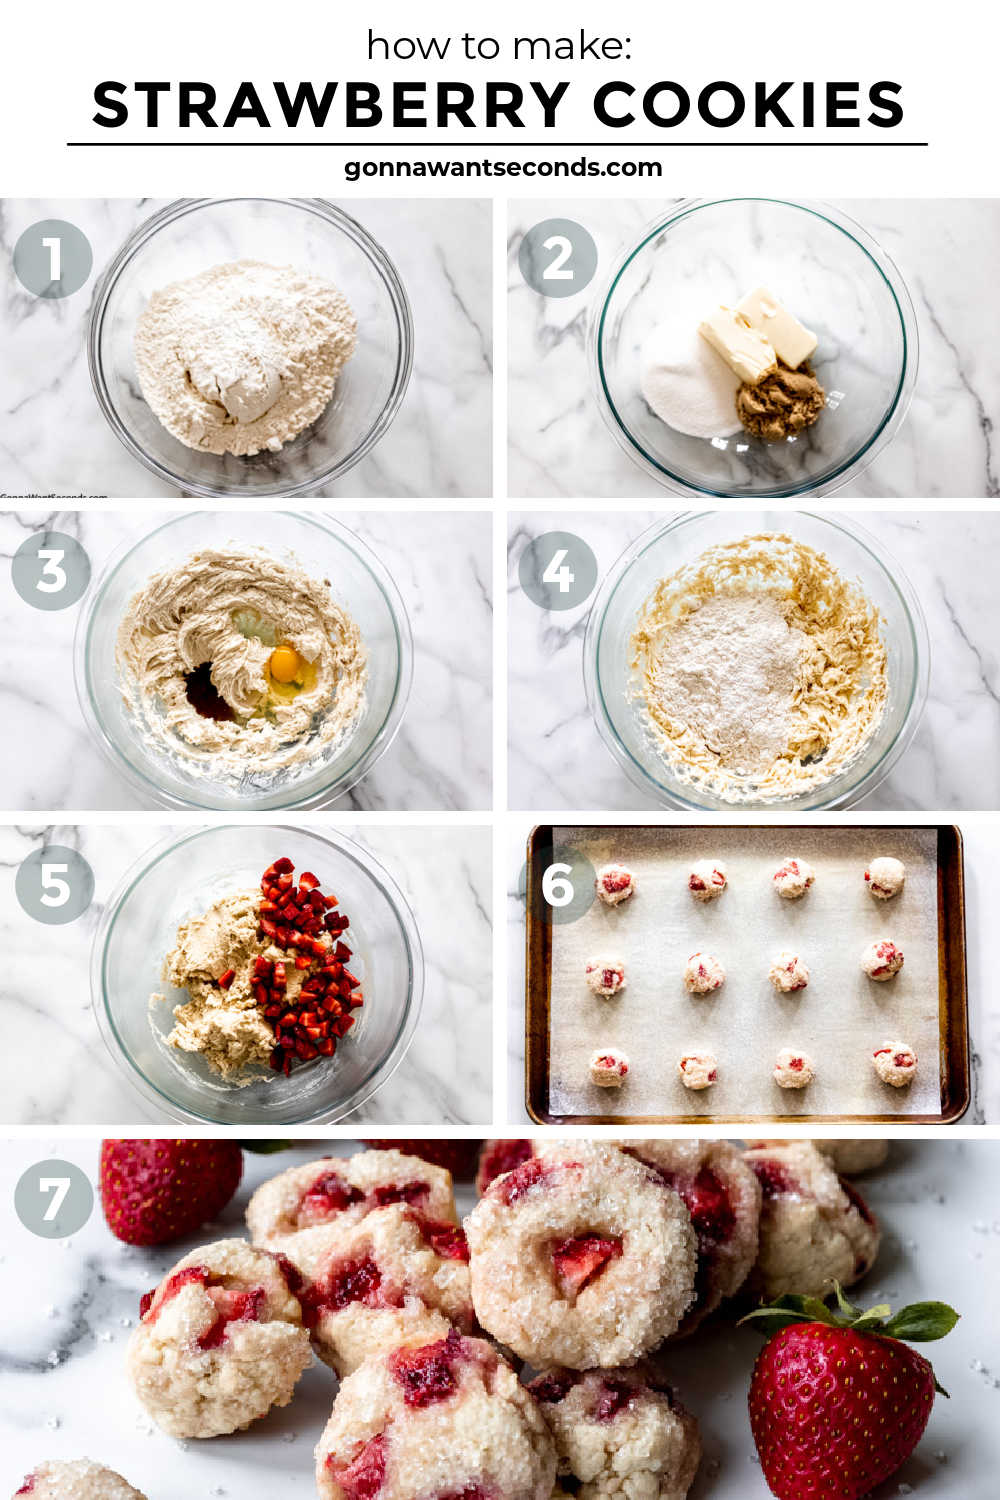 Step by step how to make strawberry cookies